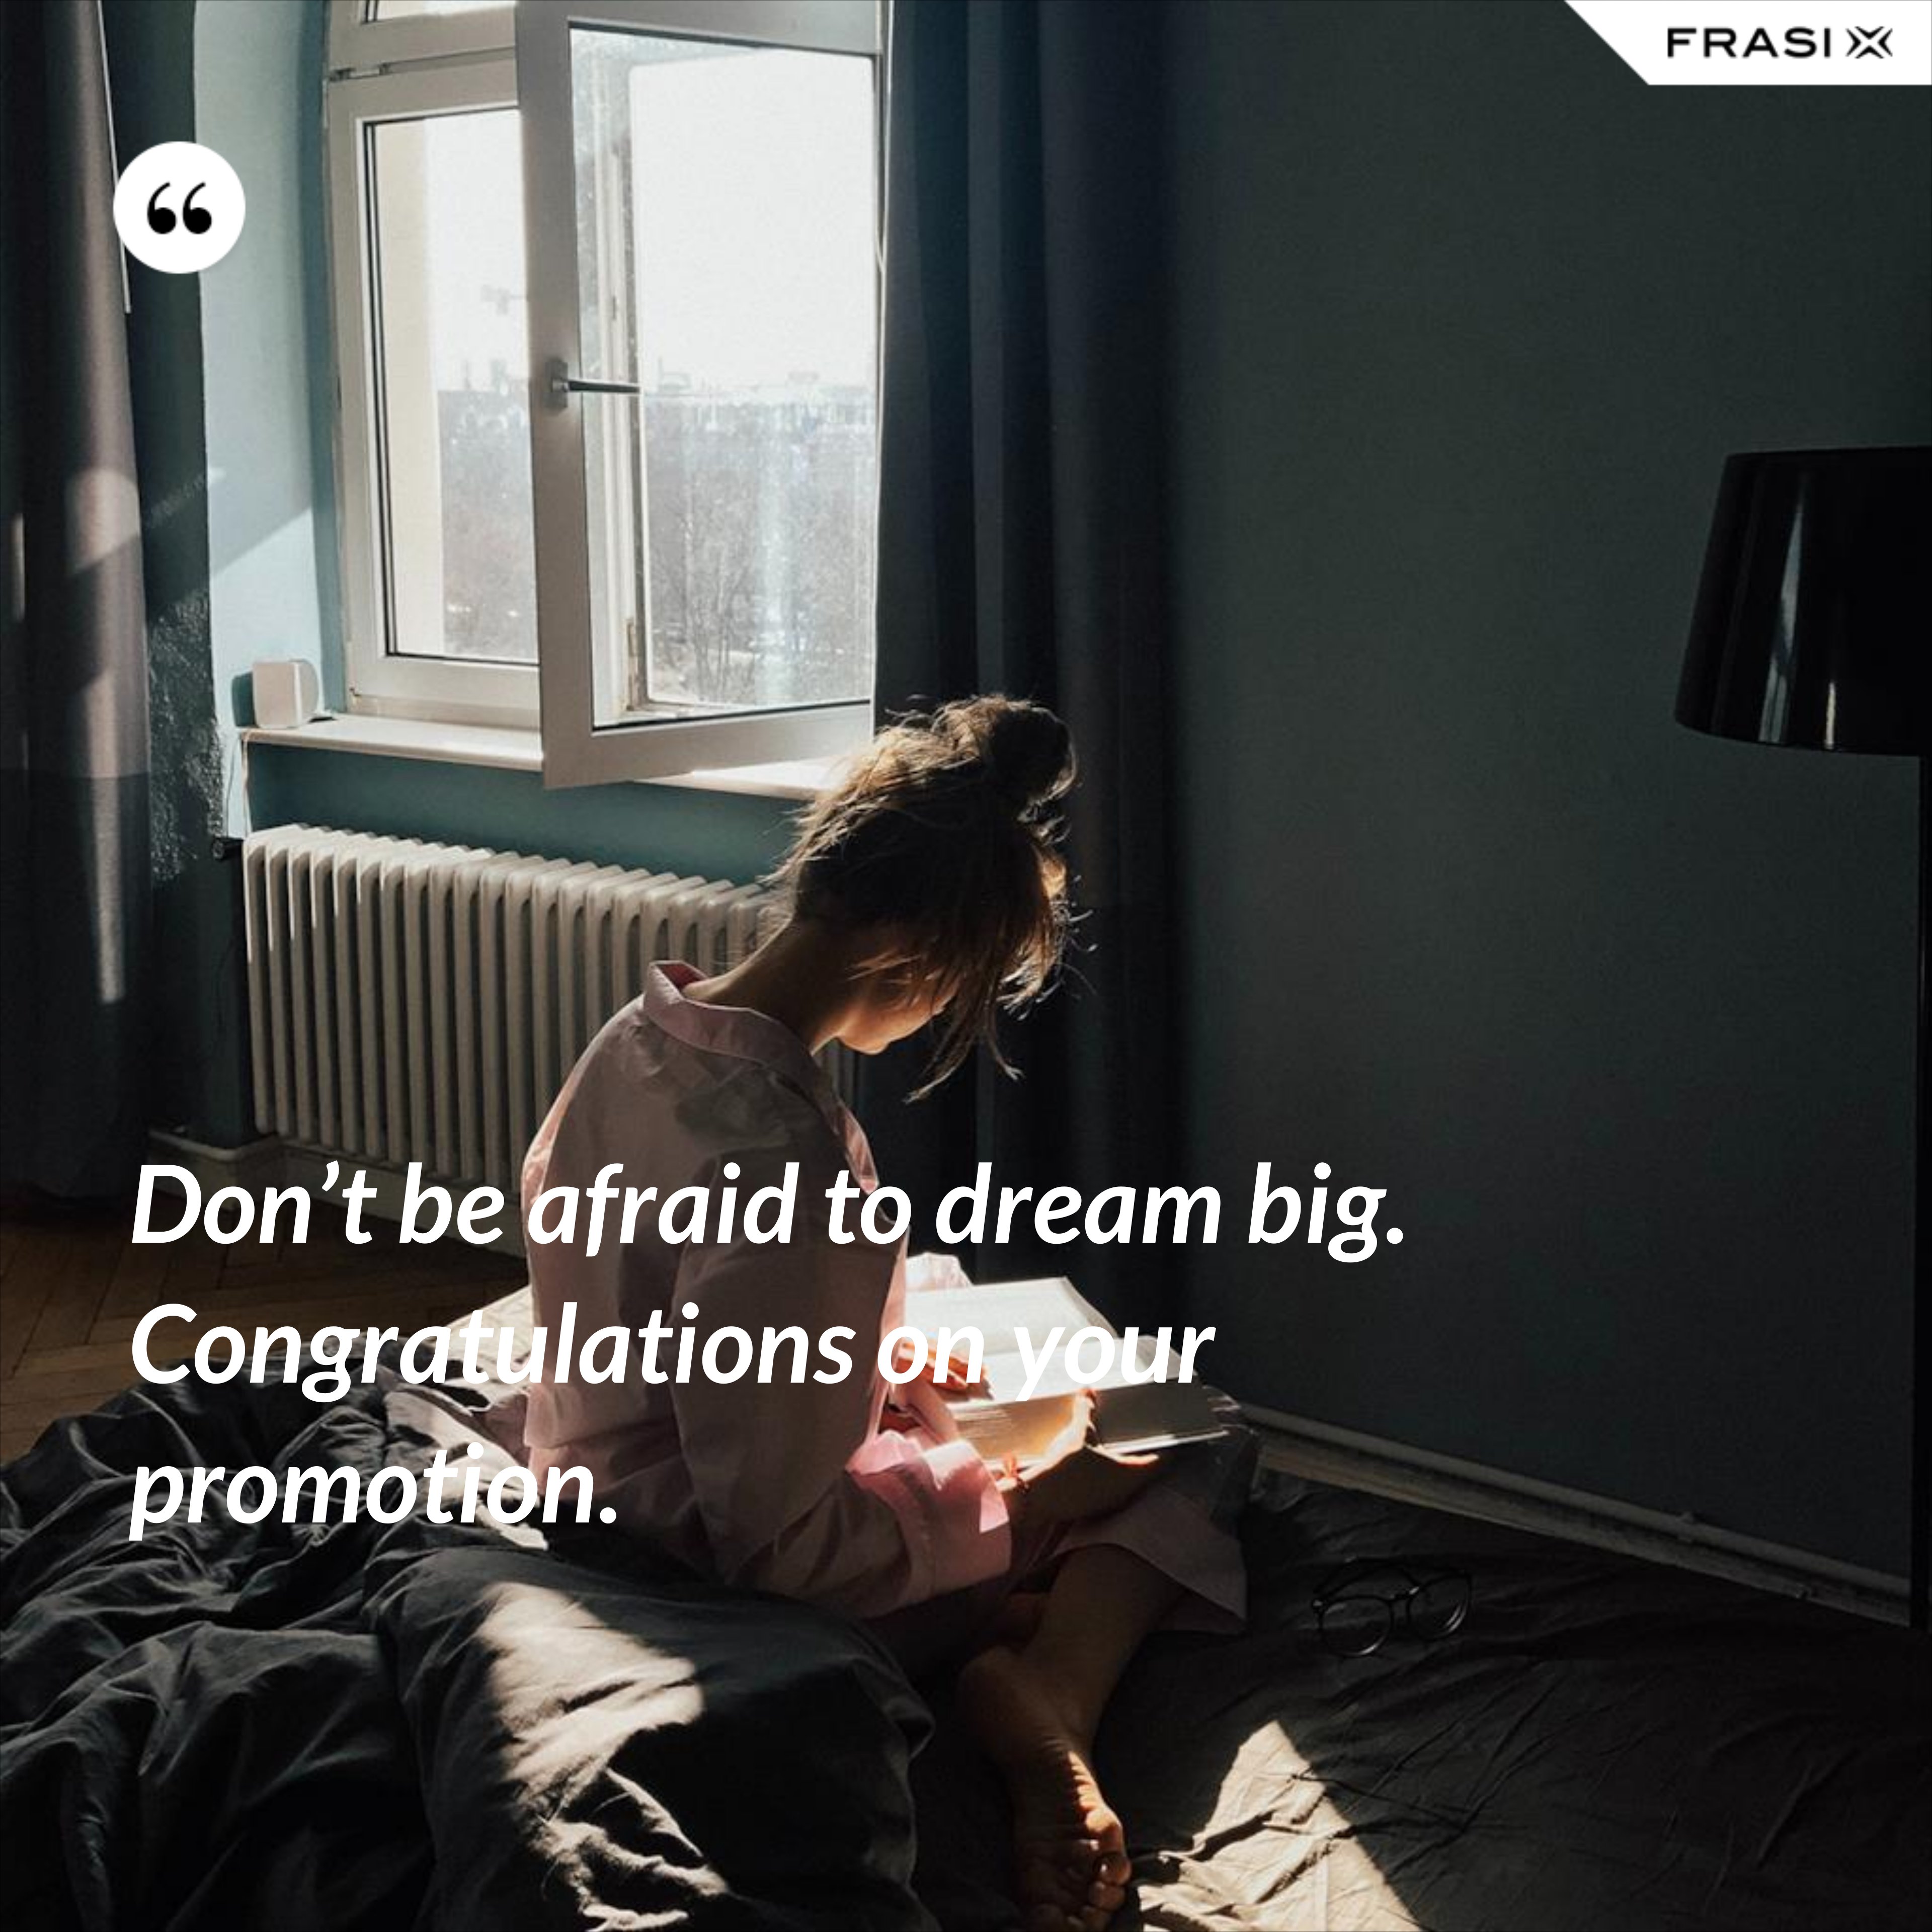 Don’t be afraid to dream big. Congratulations on your promotion. - Anonimo